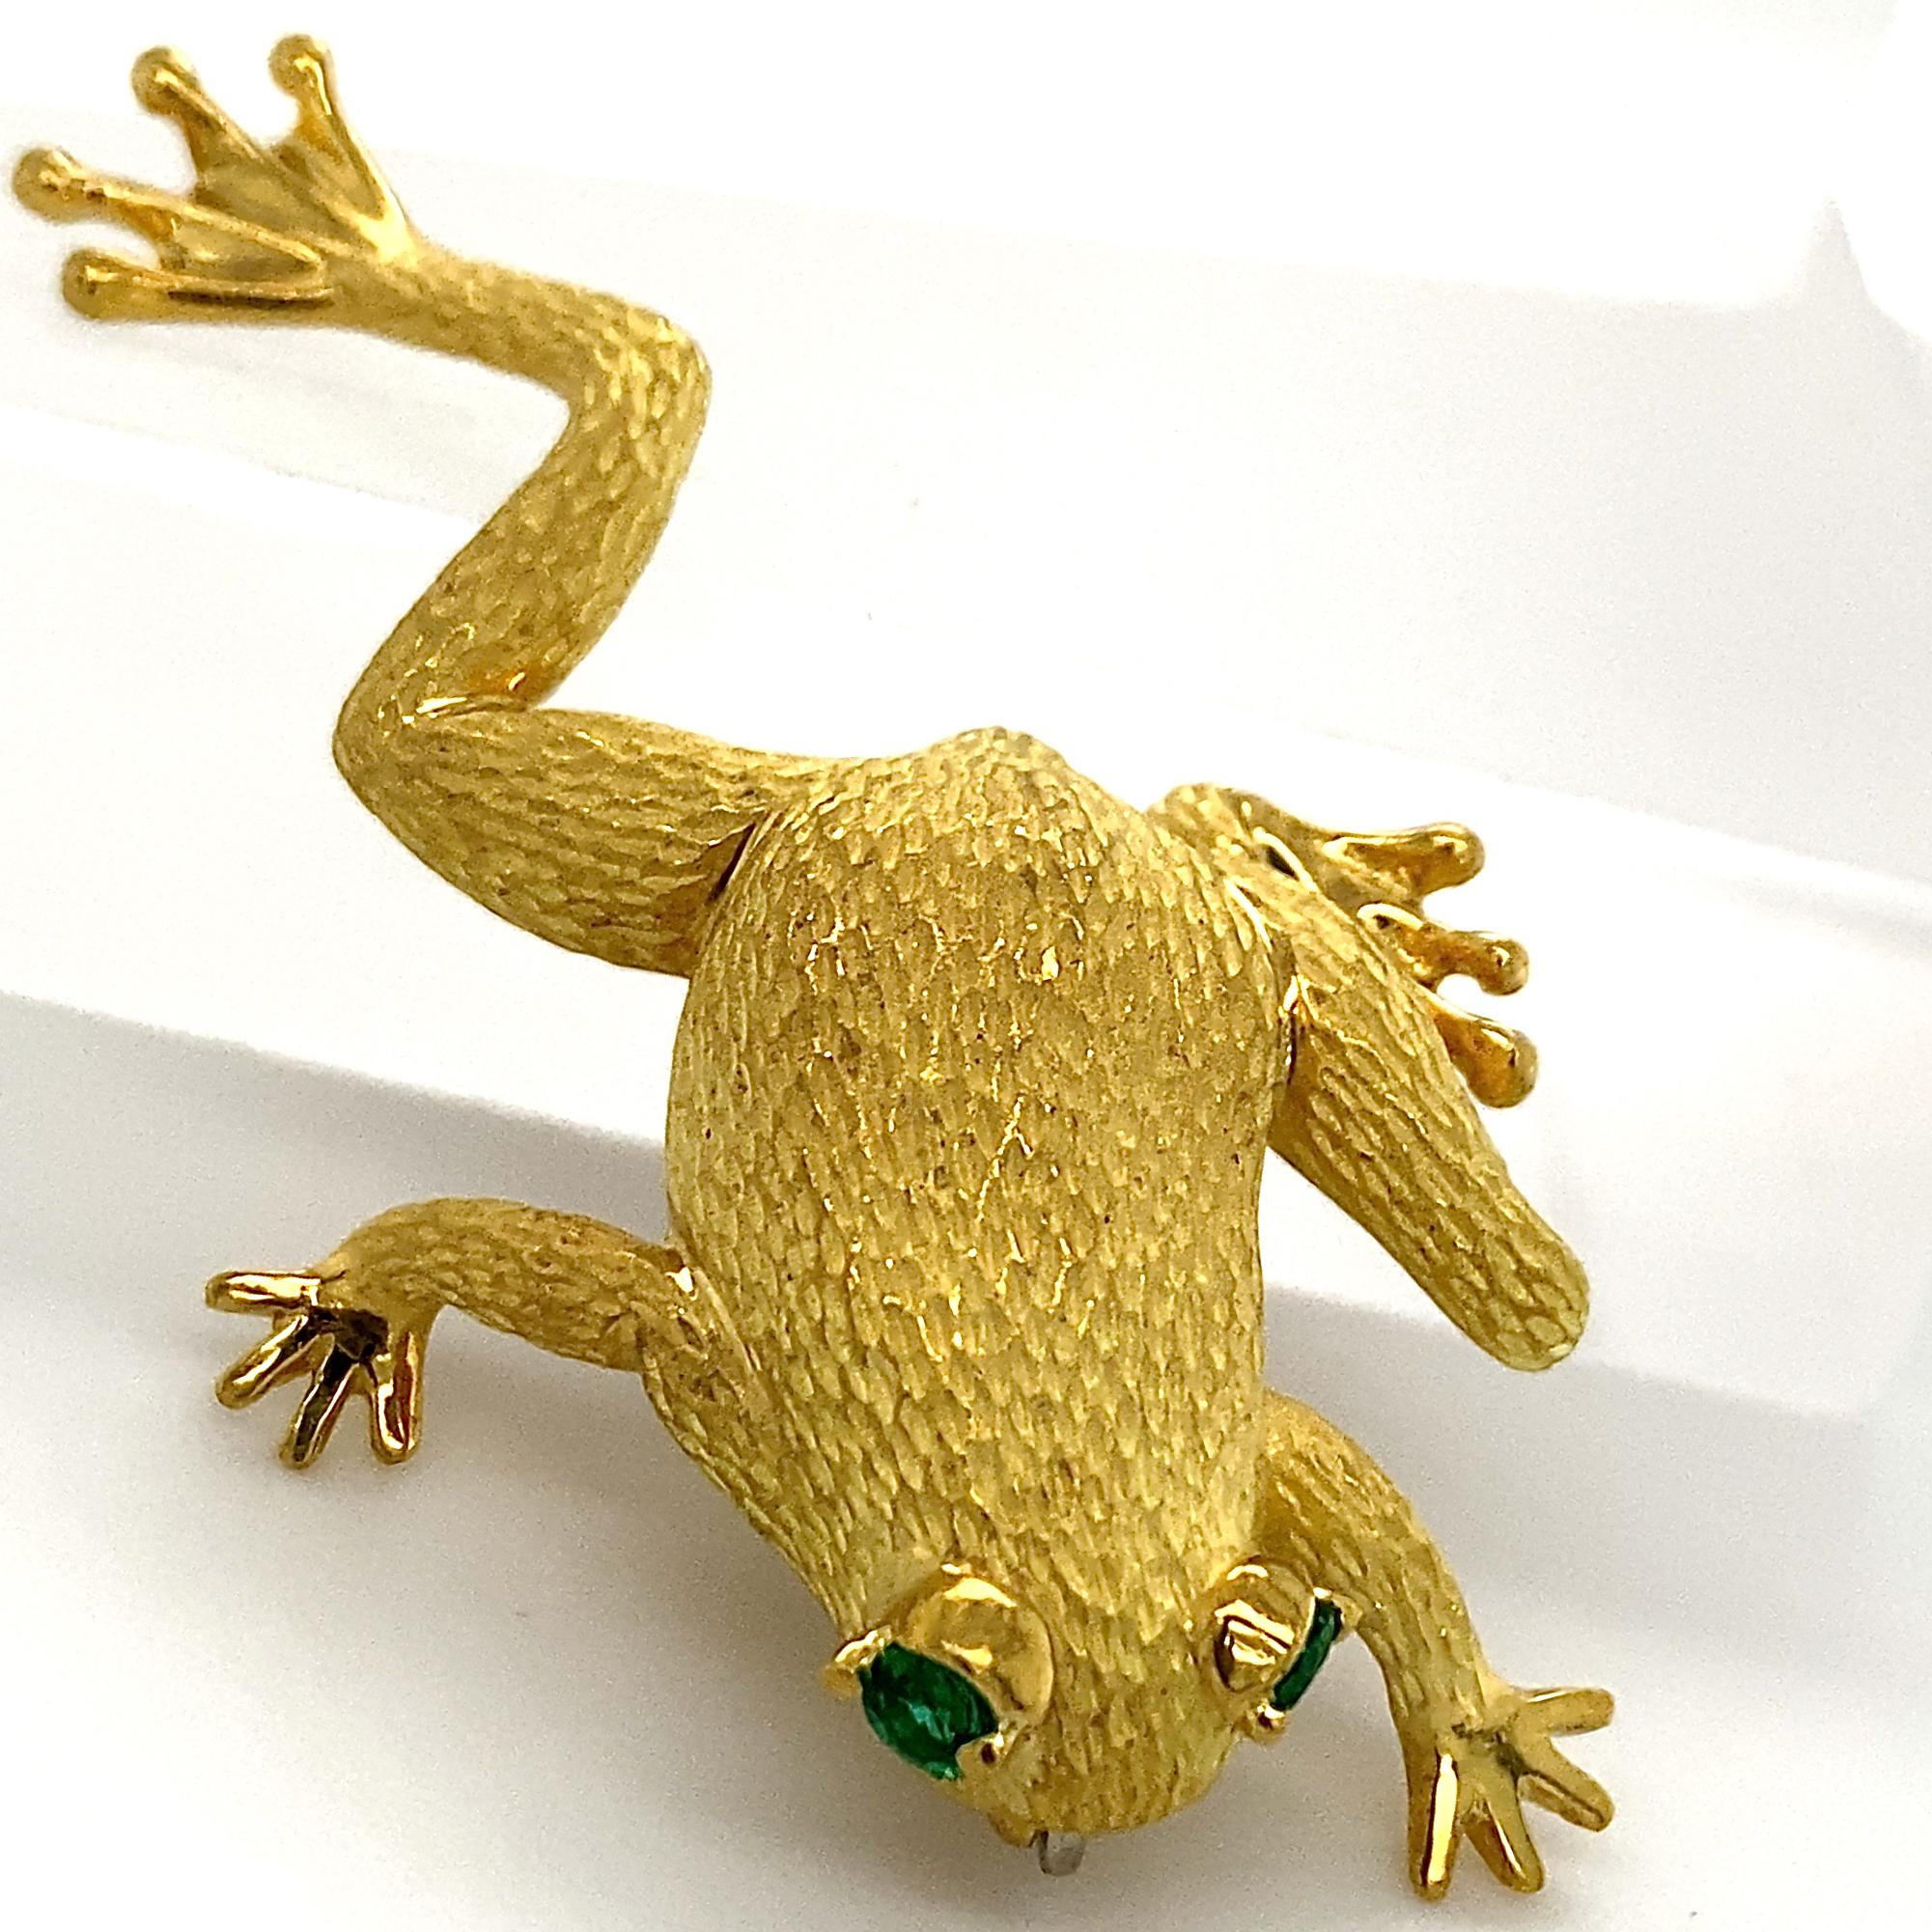 Contemporary Henry Dunay Frog Brooch in 18 Karat Gold with Emerald Eyes